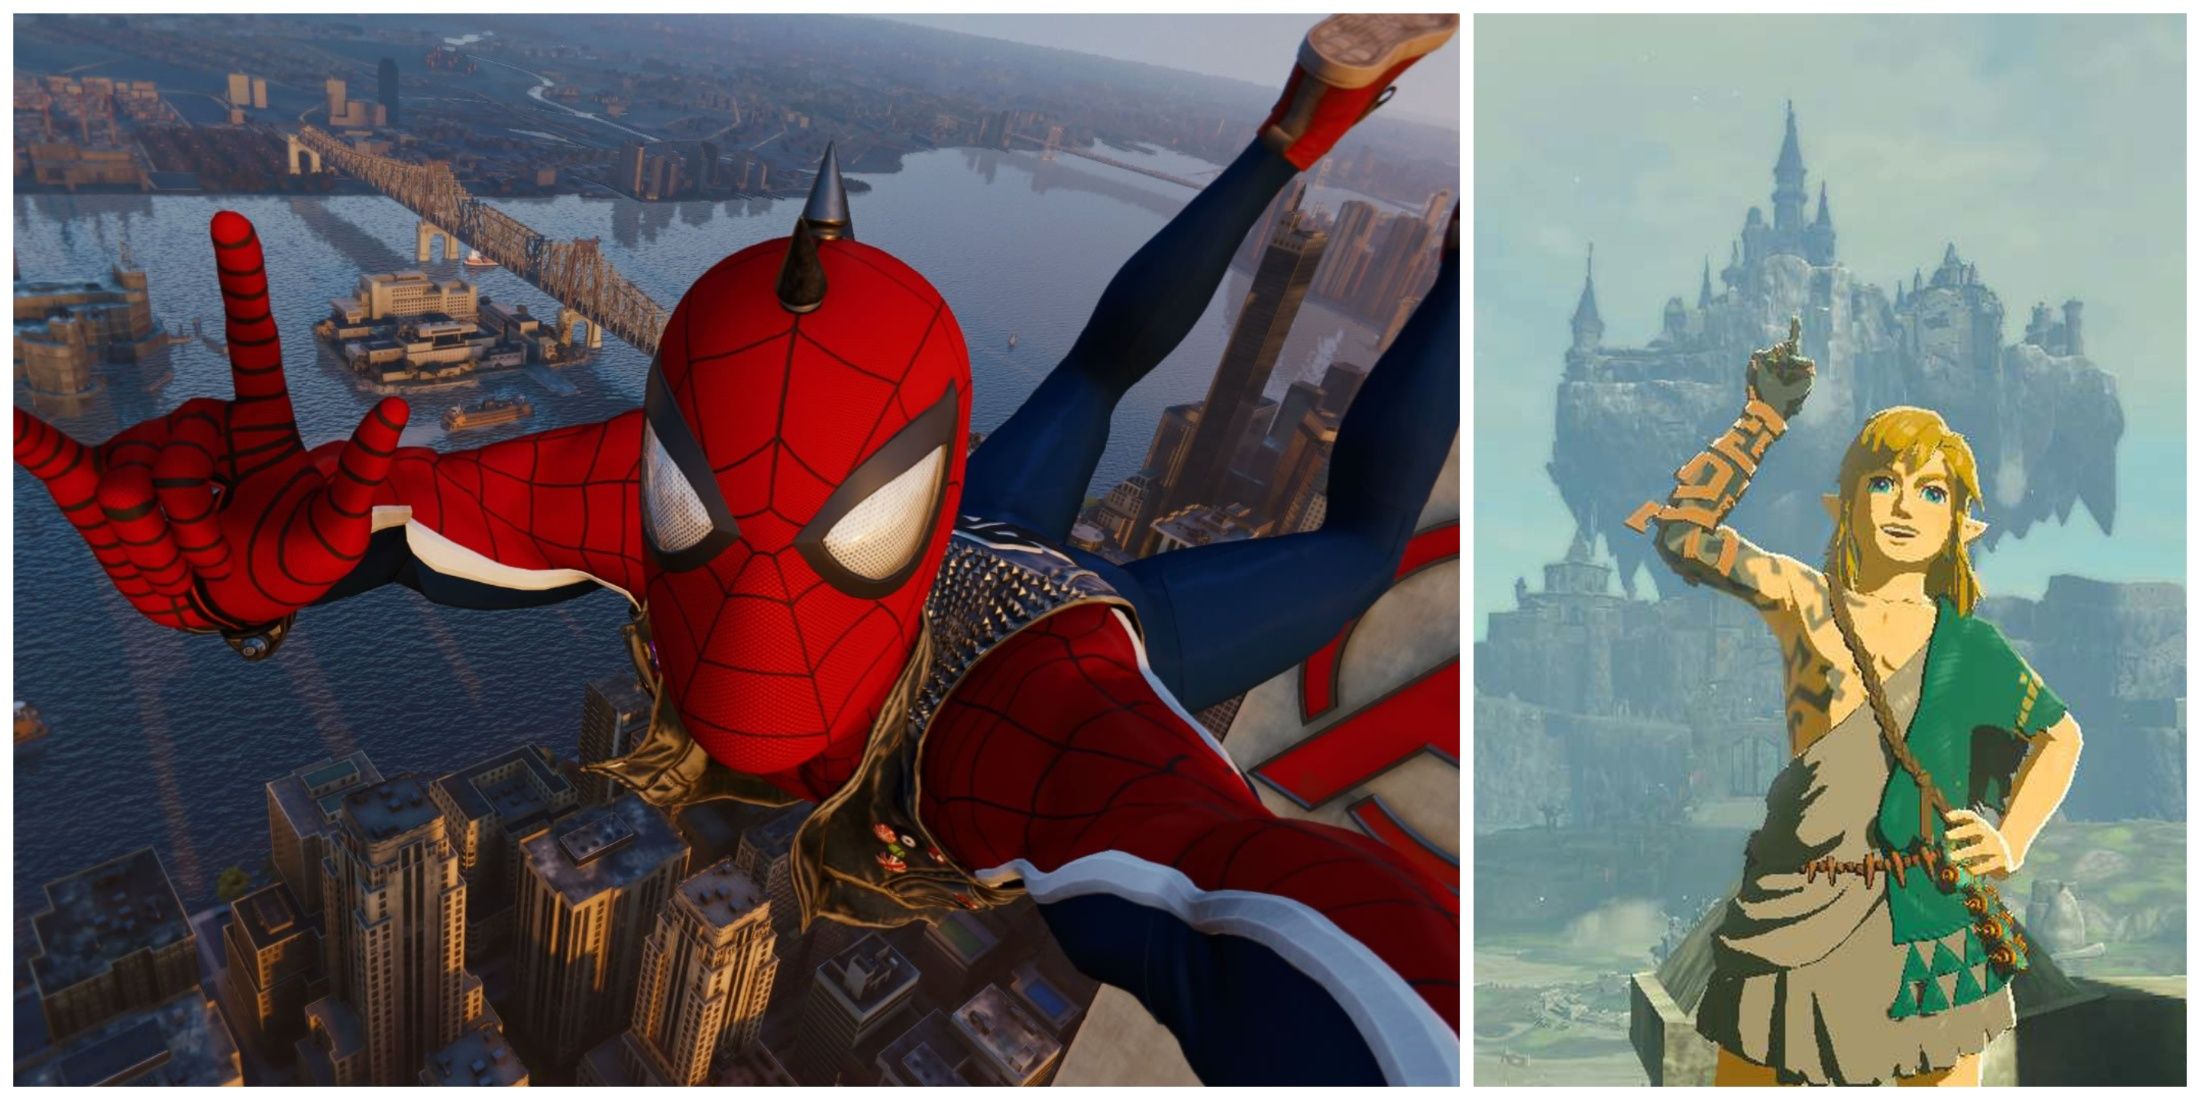 Spider-Man (left) and Link (right) taking selfies